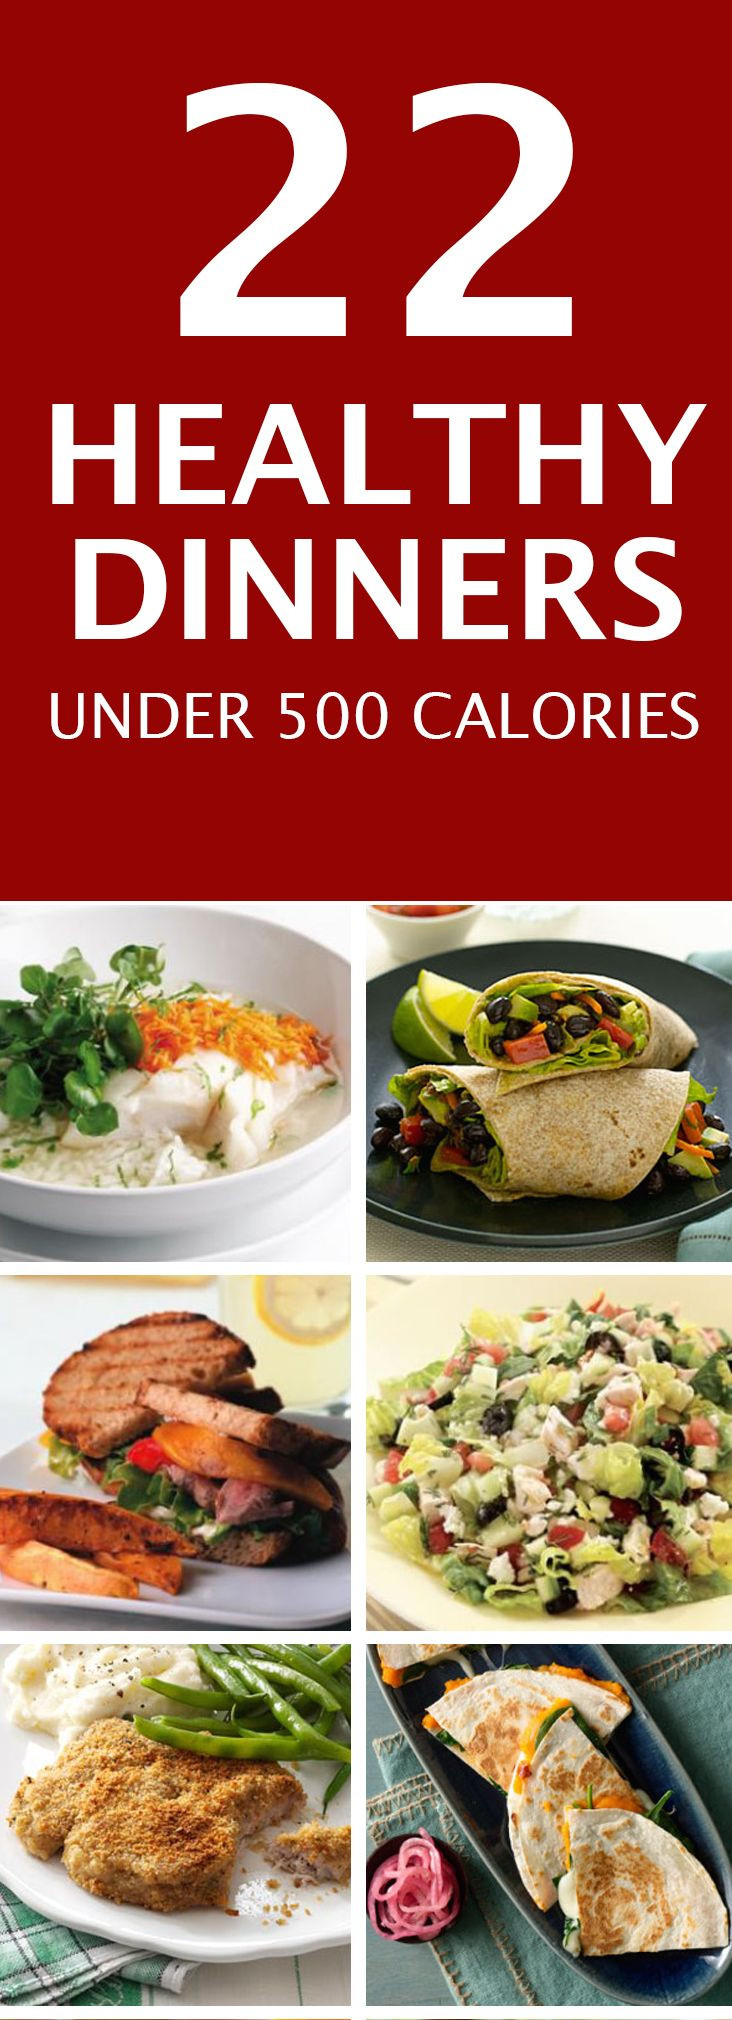 Low Calorie Dinners For 2
 Healthy Dinner Recipes 22 Meal Recipes Under 500